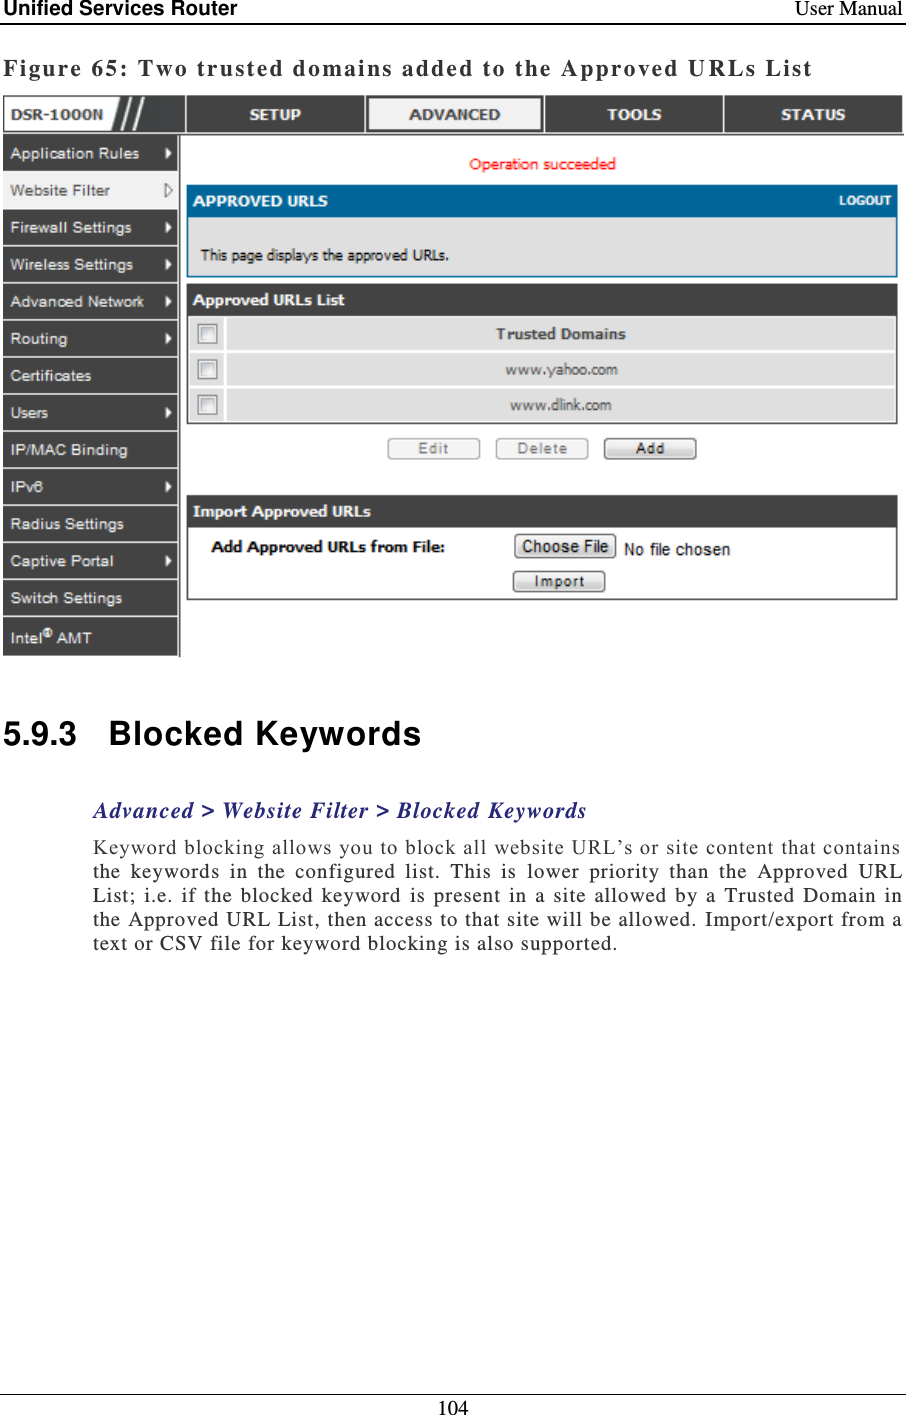 Unified Services Router    User Manual 104  Figure 65: Two tr ust ed domains adde d to the Approved  U RLs List   5.9.3  Blocked Keywords Advanced &gt; Website Filter &gt; Blocked Keywords Keyword blocking allows you to block all website URL’s or site content that contains the  keywords  in  the  configured  list.  This  is  lower  priority  than  the  Approved  URL List; i.e.  if  the  blocked  keyword  is  present  in  a  site  allowed  by  a  Trusted  Domain  in the Approved URL List, then access to that site will be allowed.  Import/export from a text or CSV file for keyword blocking is also supported.  